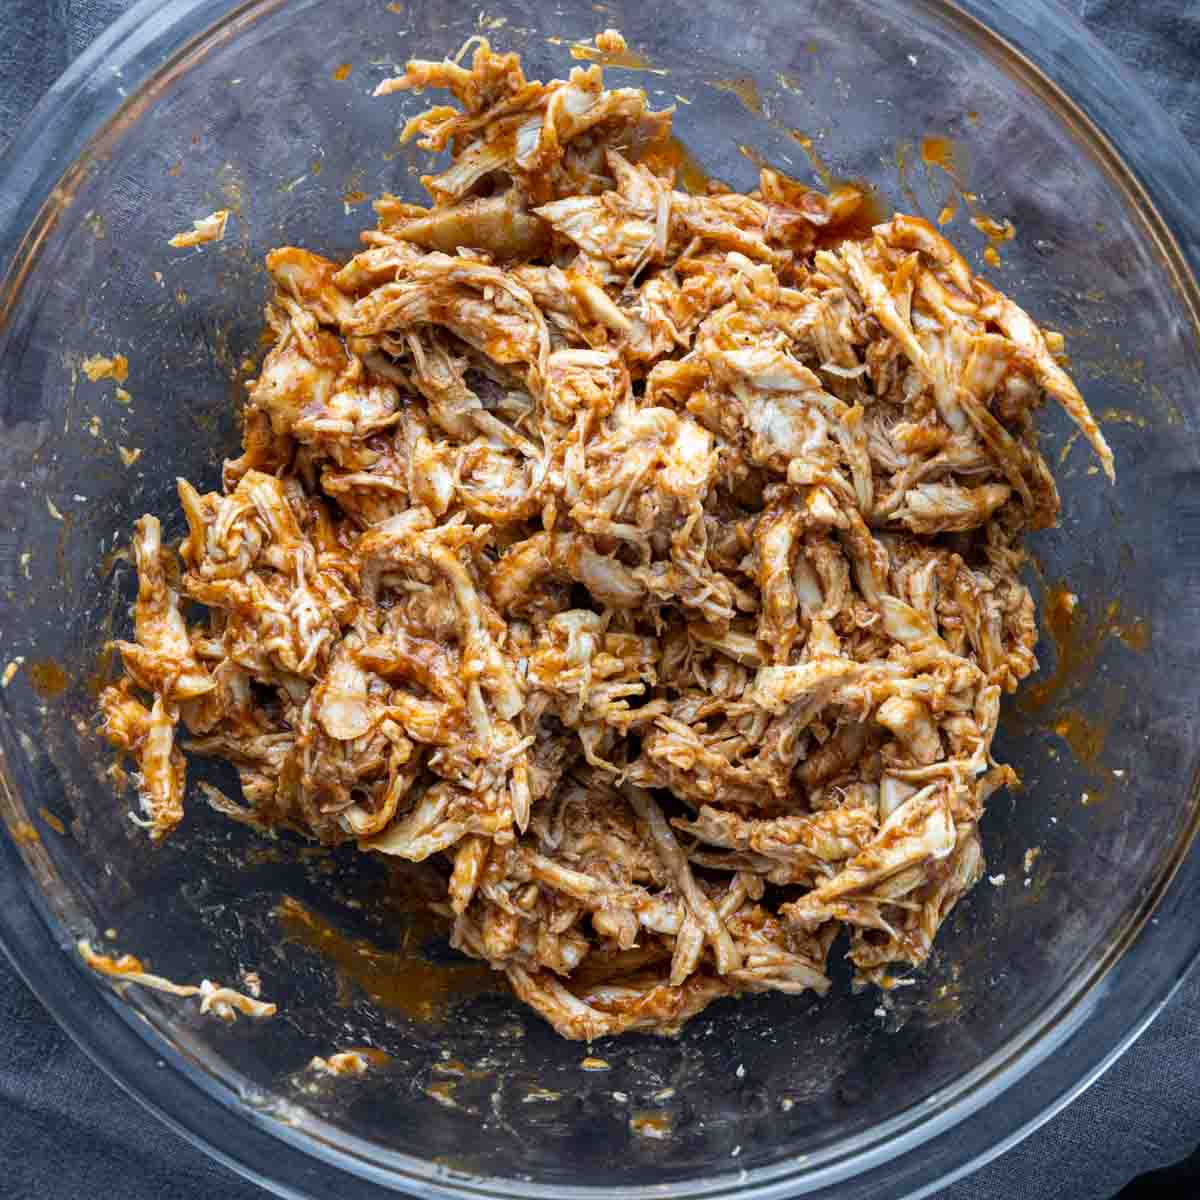 shredded chicken and BBQ sauce in a bowl